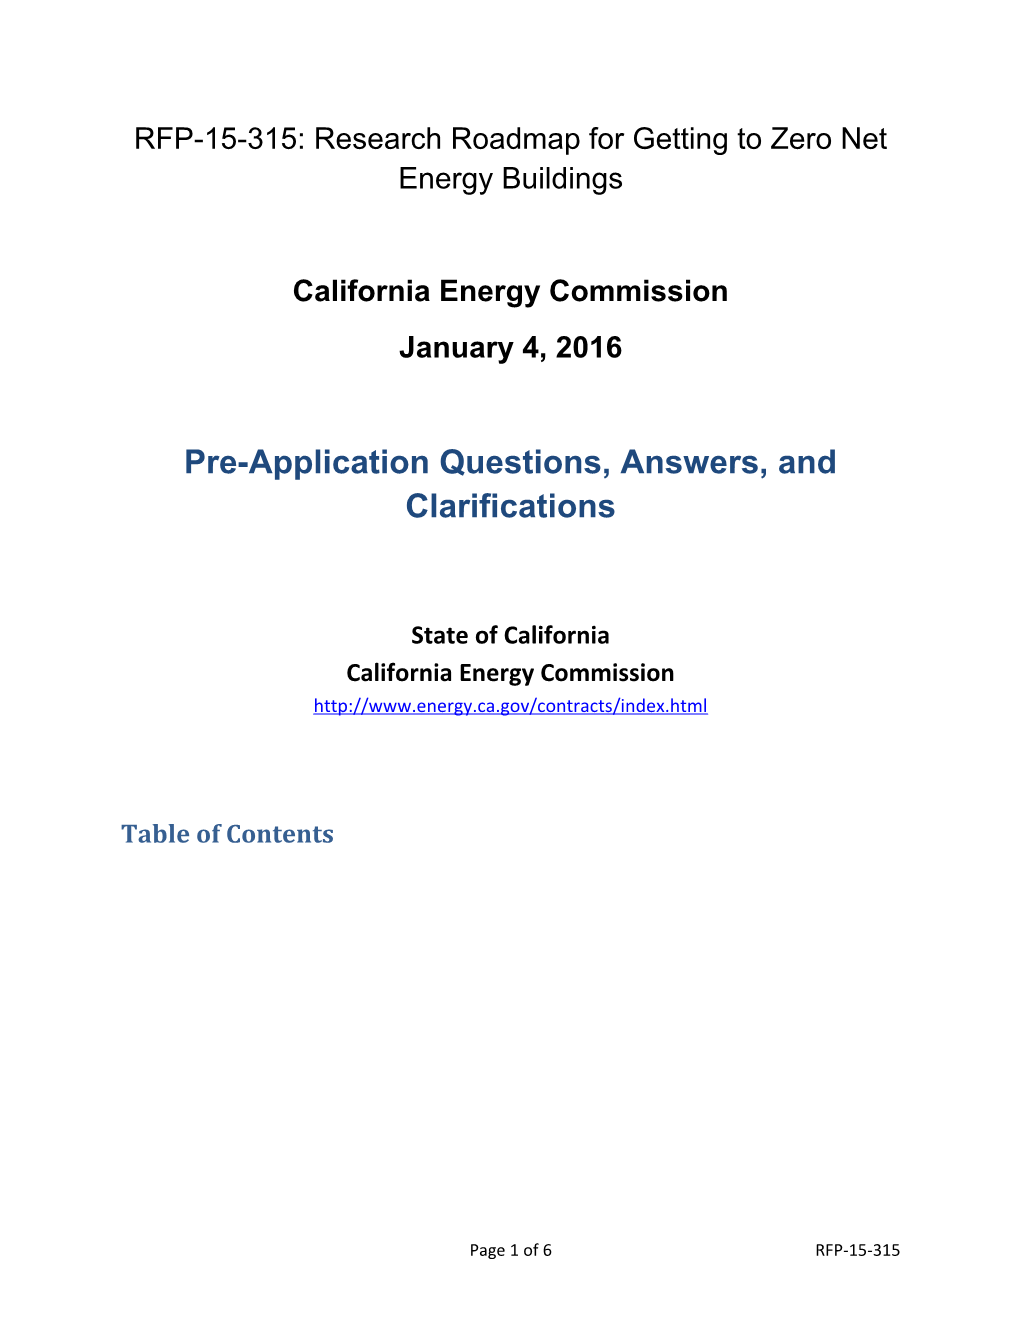 RFP-15-315: Research Roadmap for Getting to Zero Net Energy Buildings